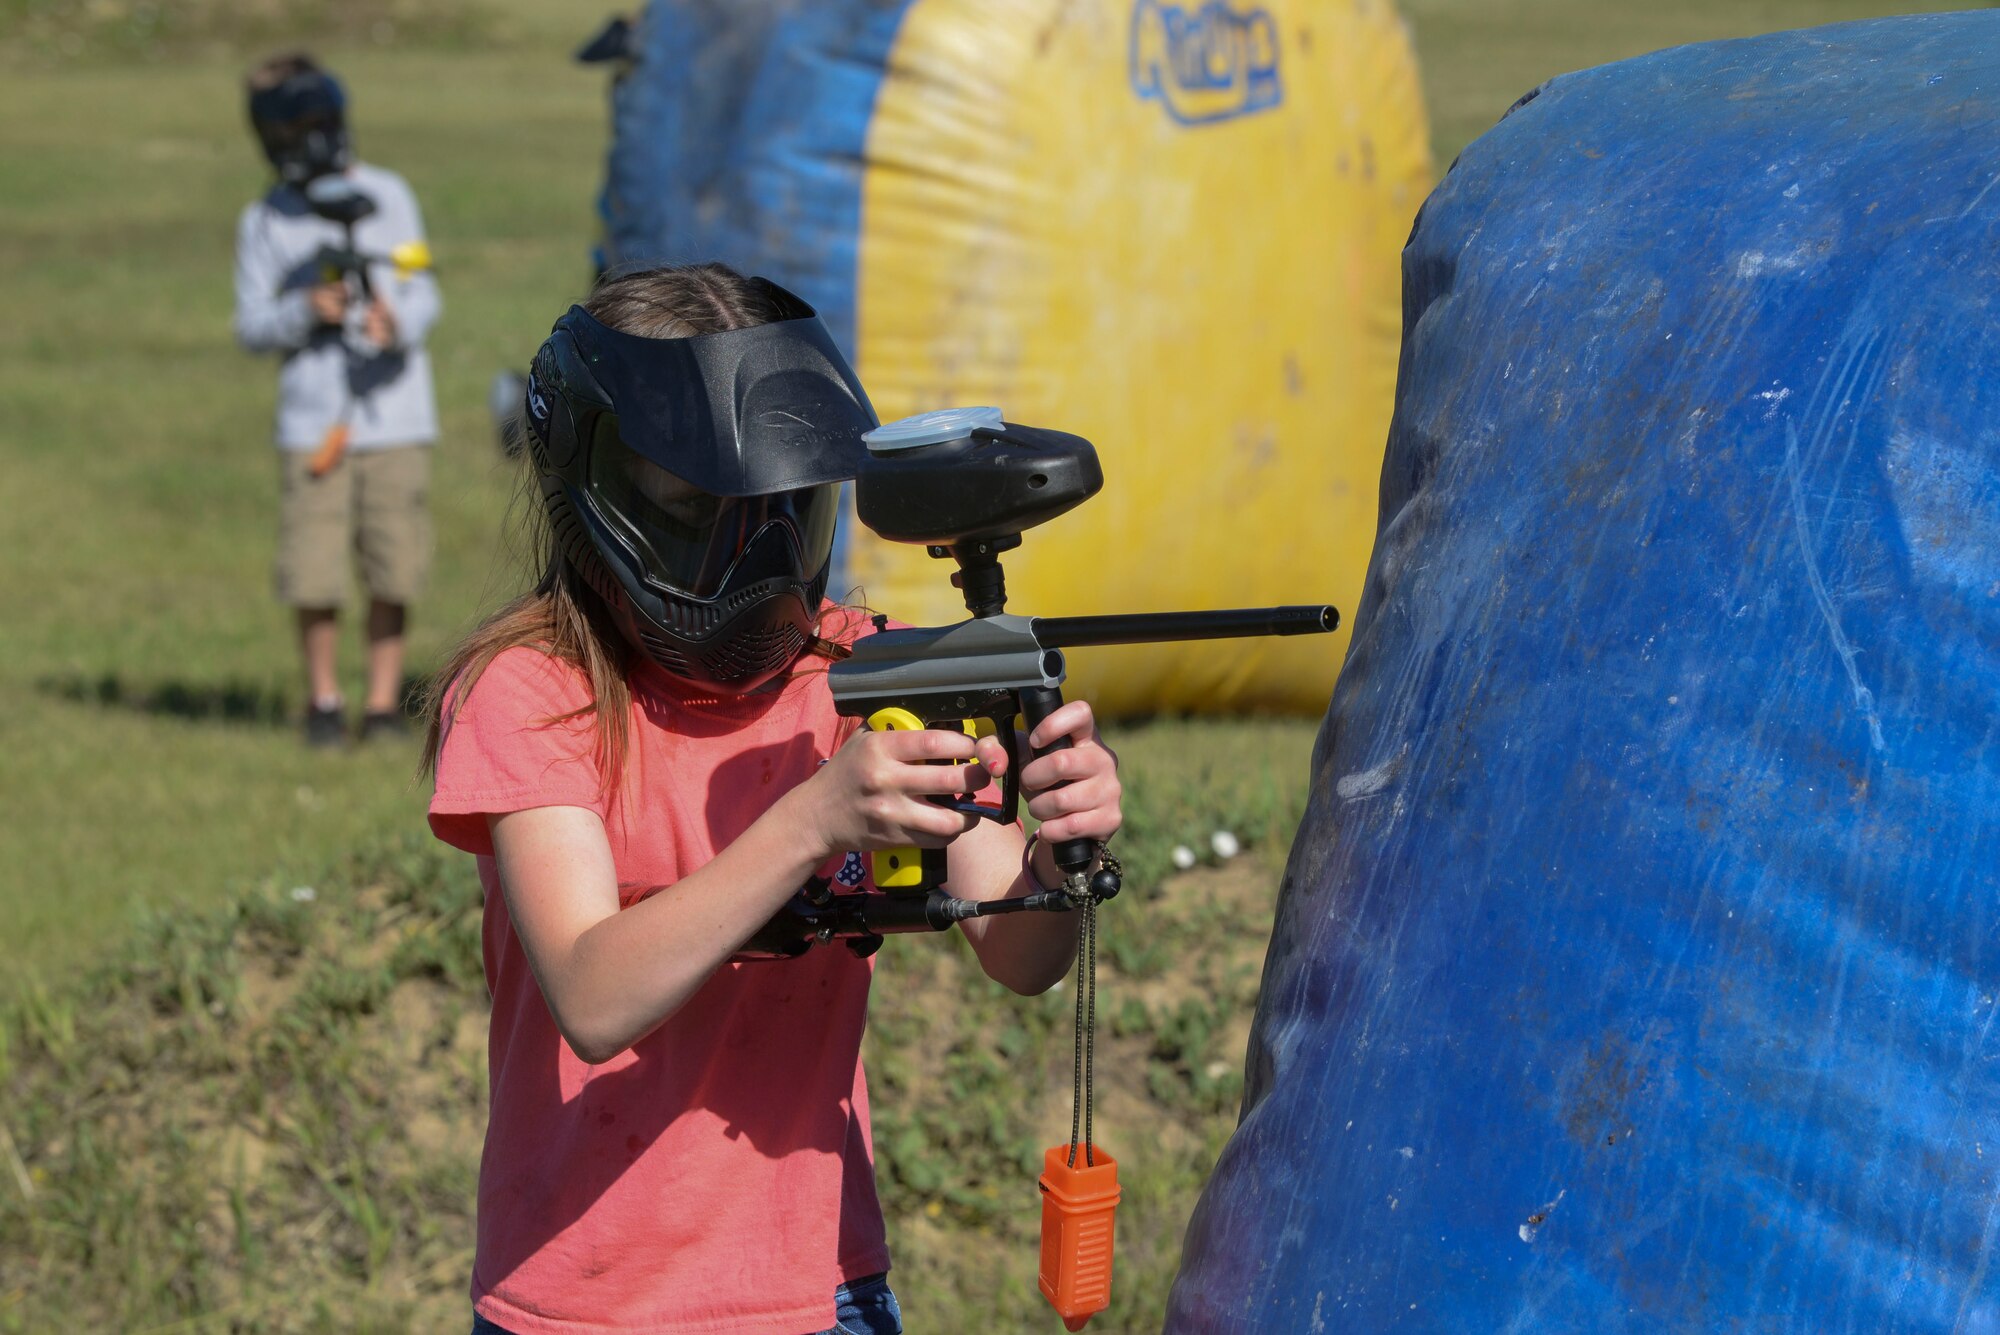 Natalie Drain, a member of the youth center at Minot Air Force Base, N.D., shoots a paintball gun during Paintball 101 June 17, 2016. Children learned the basic skills from skilled professionals and participated in a week-long camp offered to members of the youth center. (U.S. Air Force photo/Airman 1st Class Jessica Weissman)